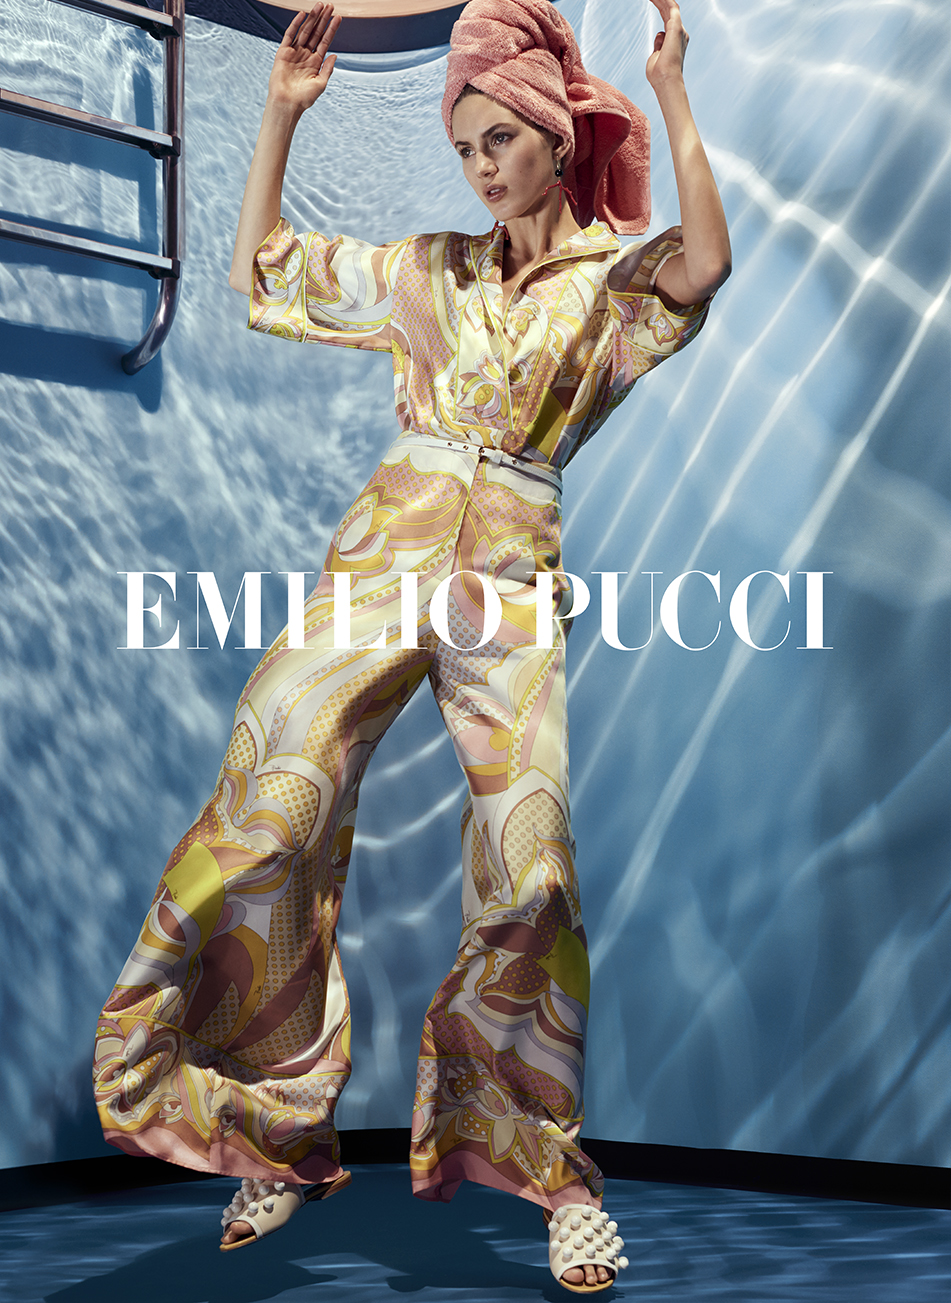 Emilio Pucci SS18 with Valery Kaufman